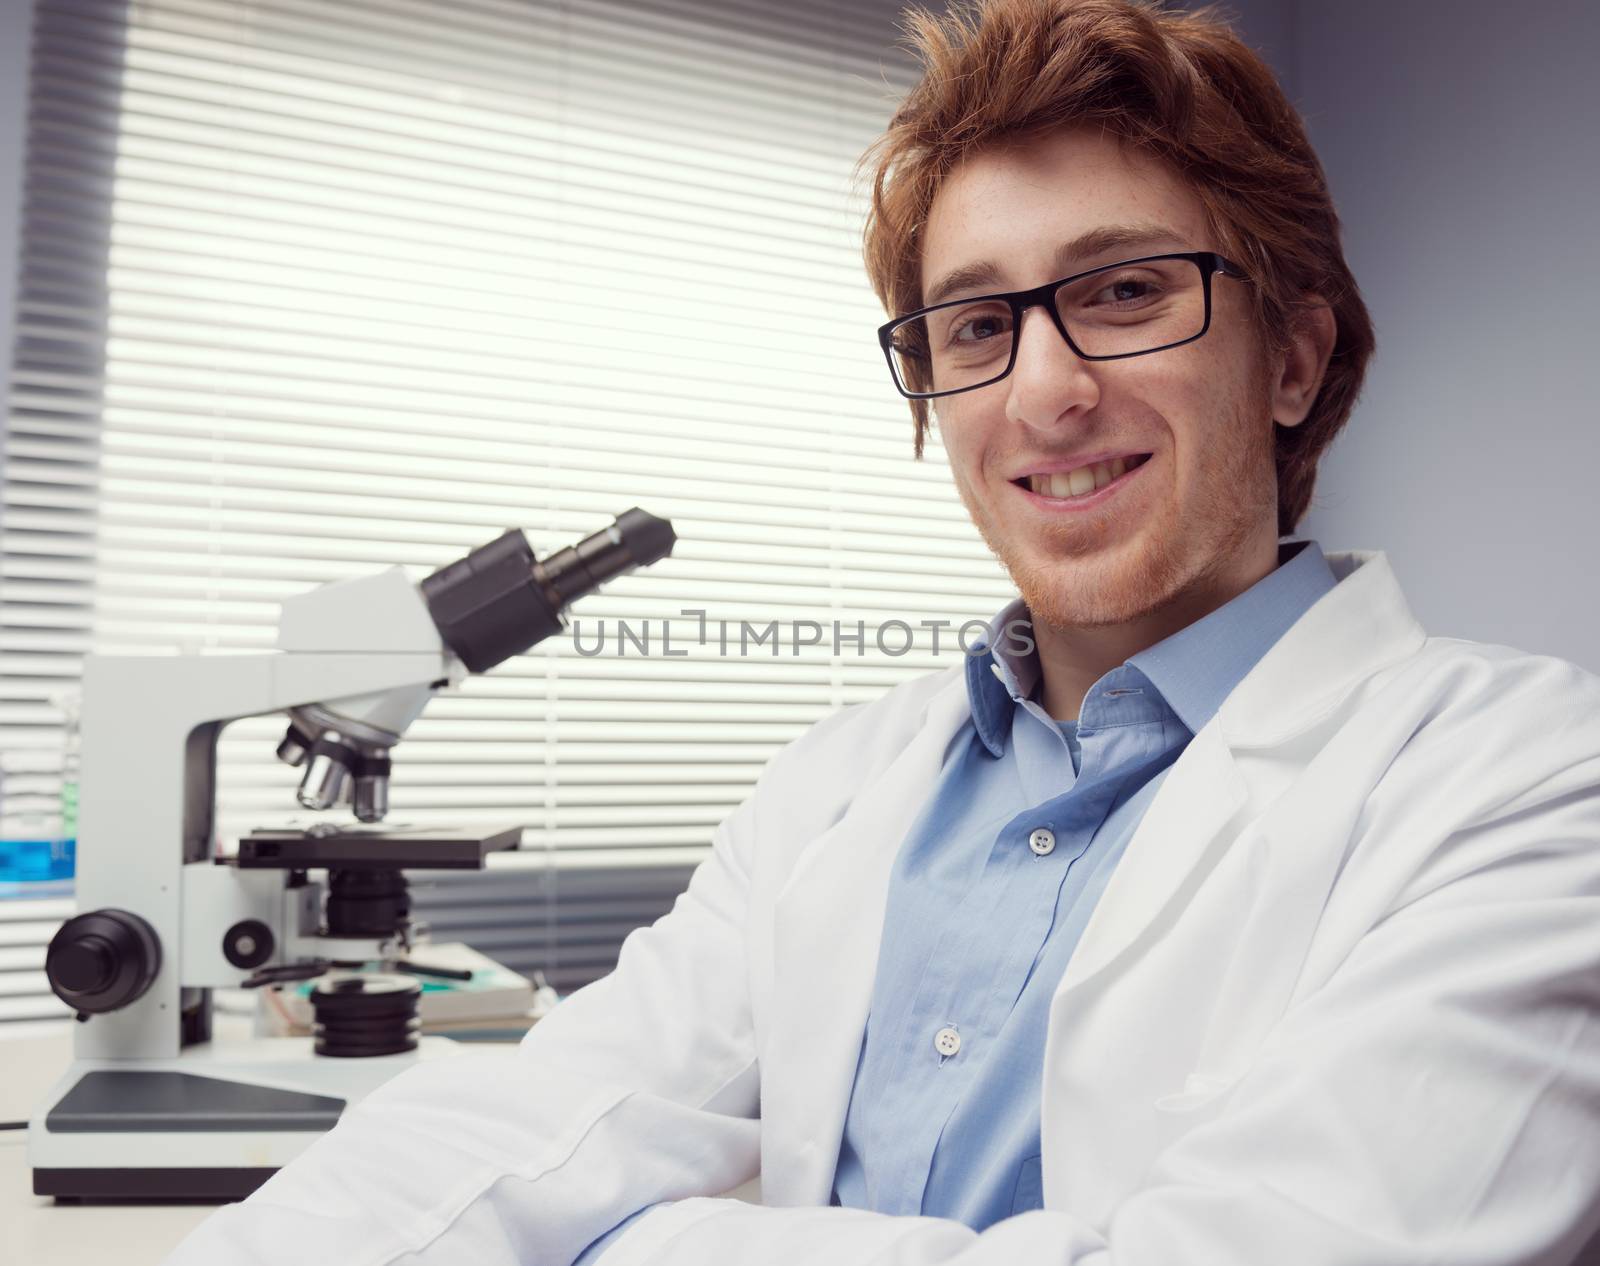 Student researcher smiling with arms crossed and microscope on background.